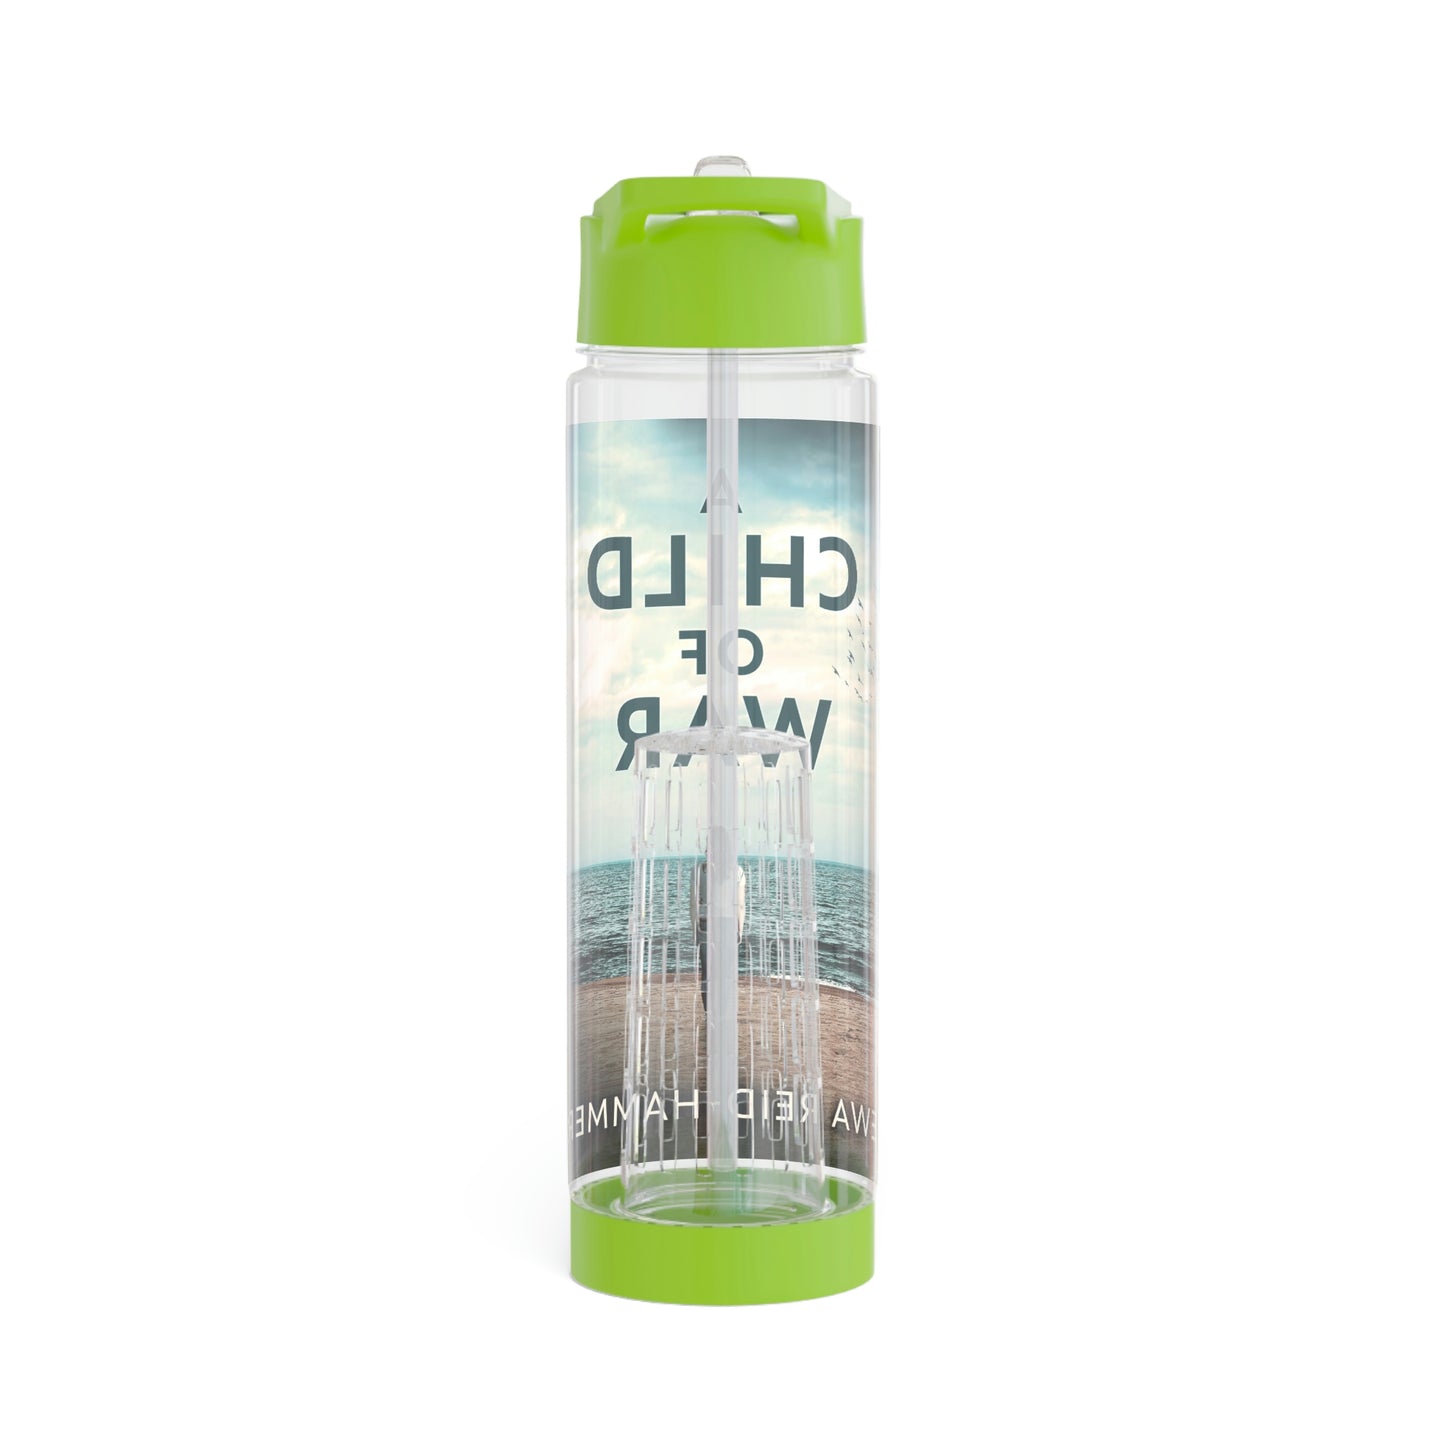 A Child Of War - Infuser Water Bottle